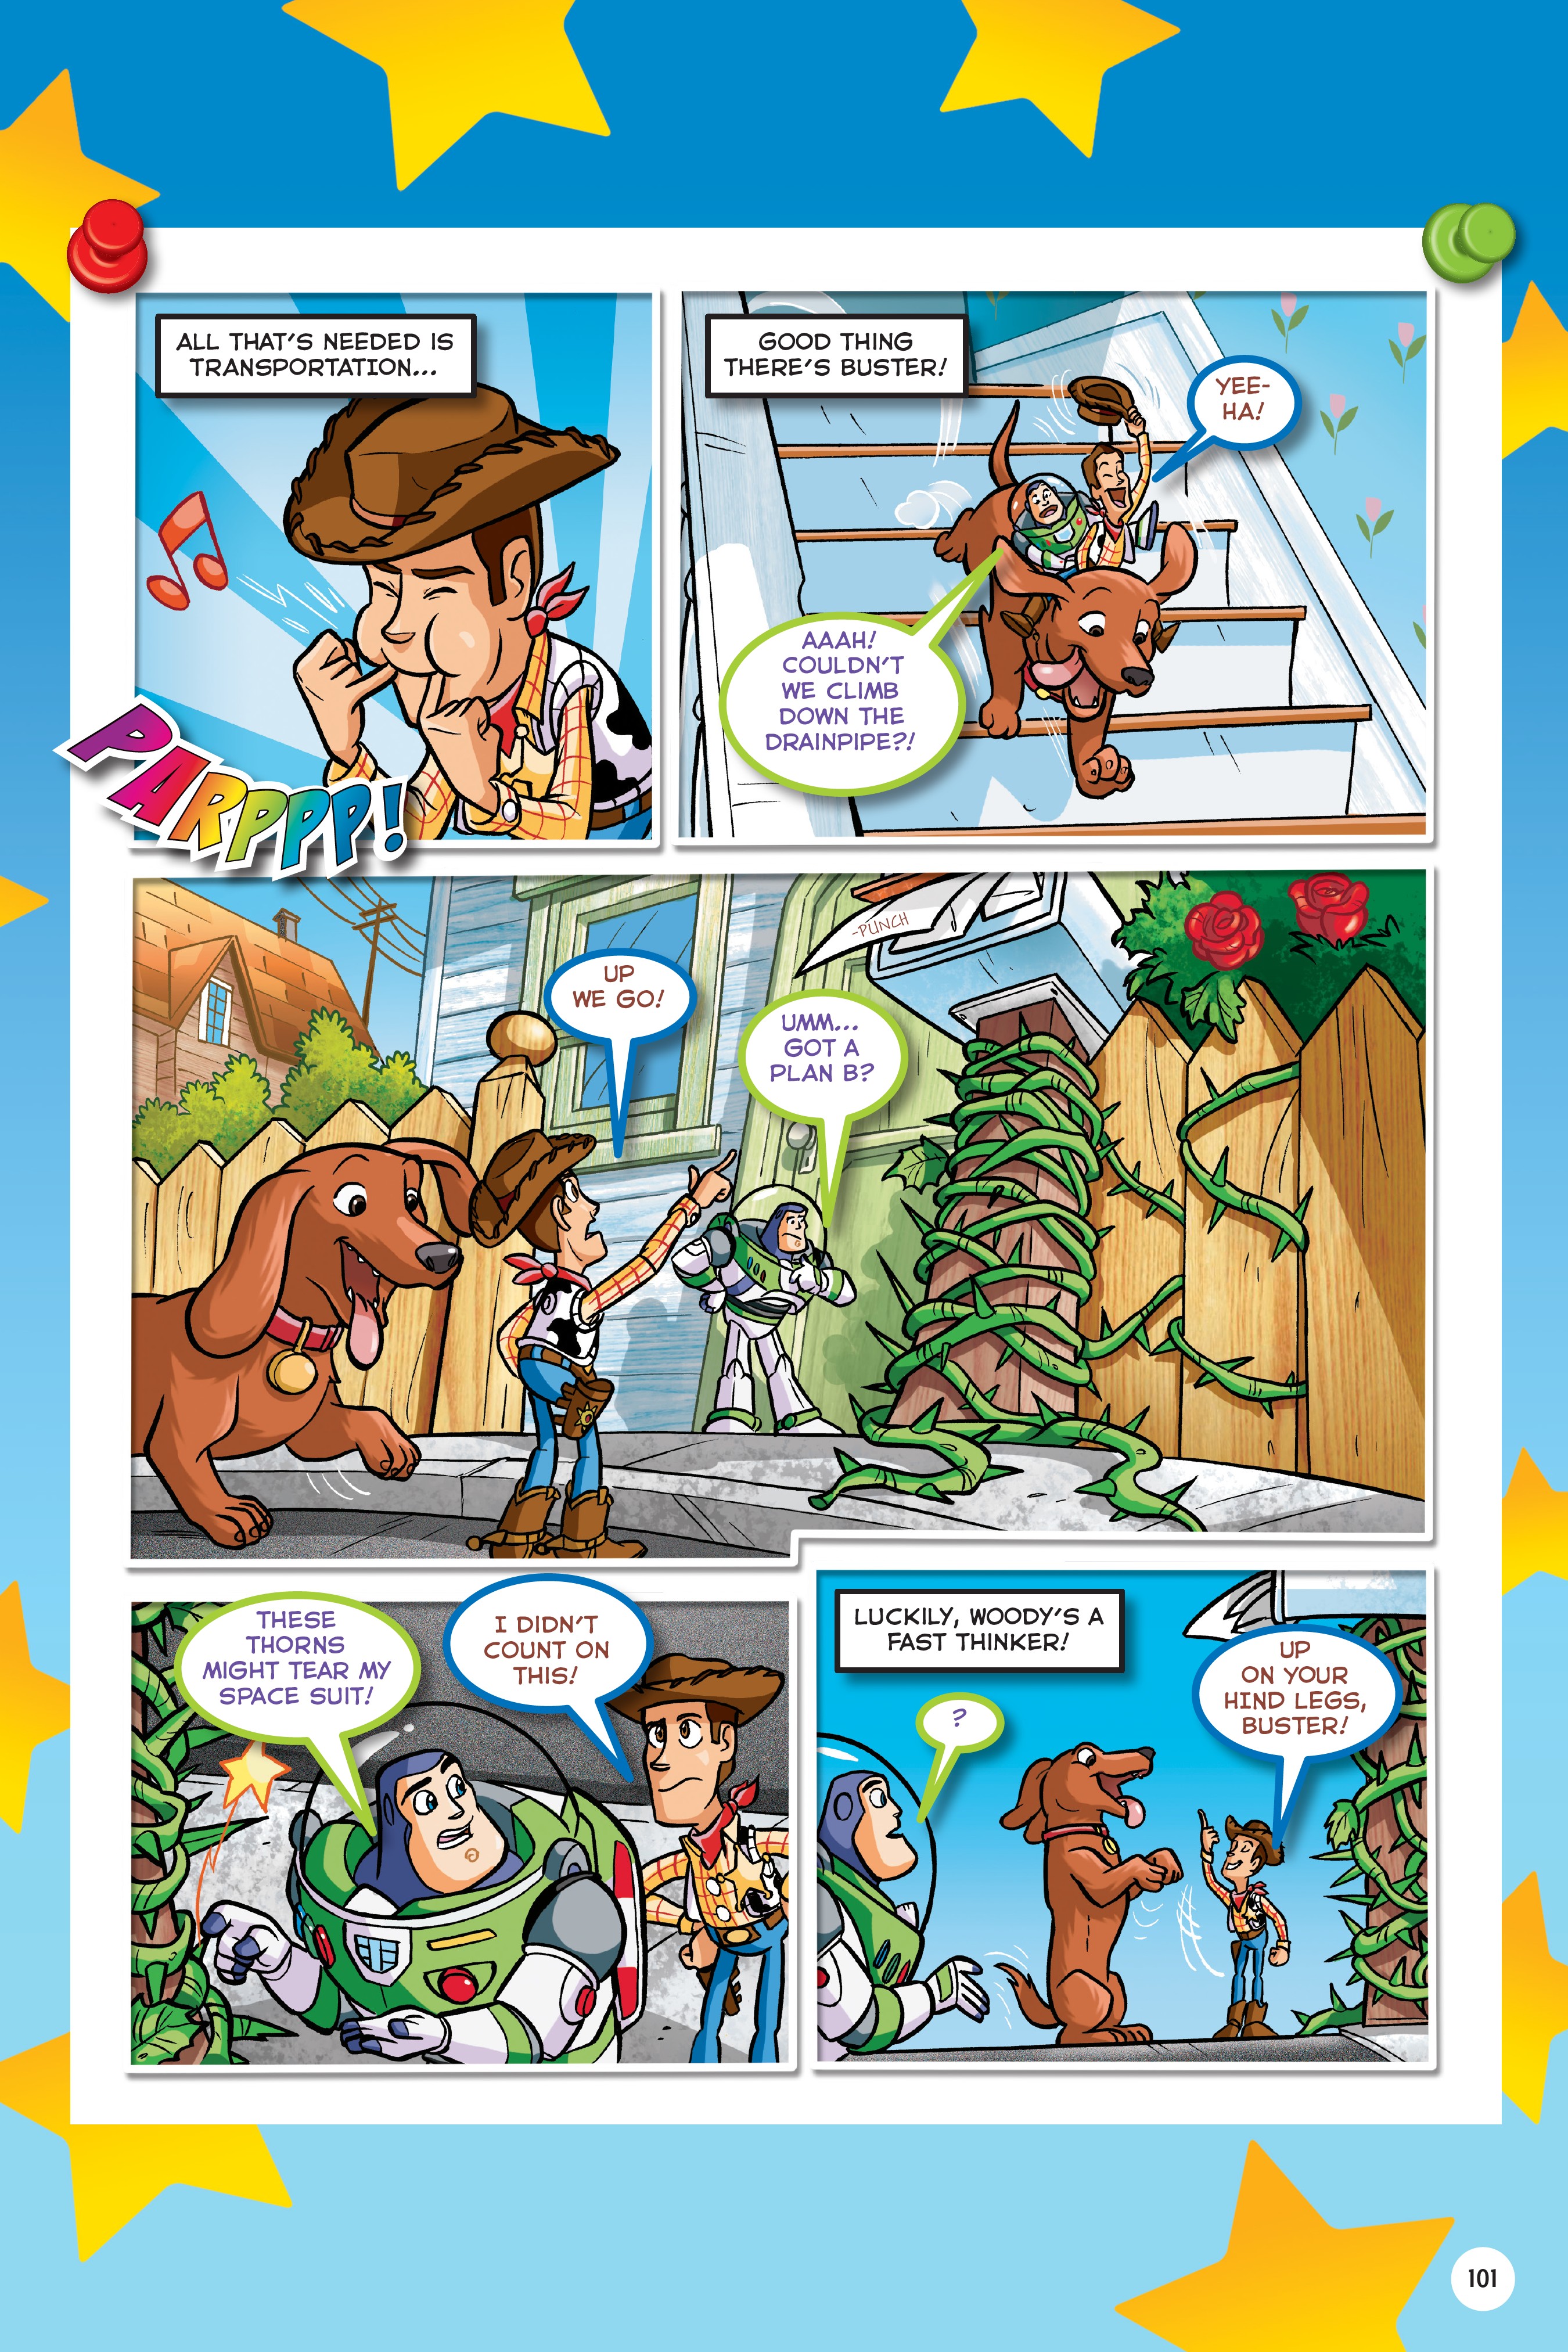 Disney Pixar Toy Story Adventures Tpb 1 Part 2 | Read Disney Pixar Toy Story  Adventures Tpb 1 Part 2 comic online in high quality. Read Full Comic  online for free -